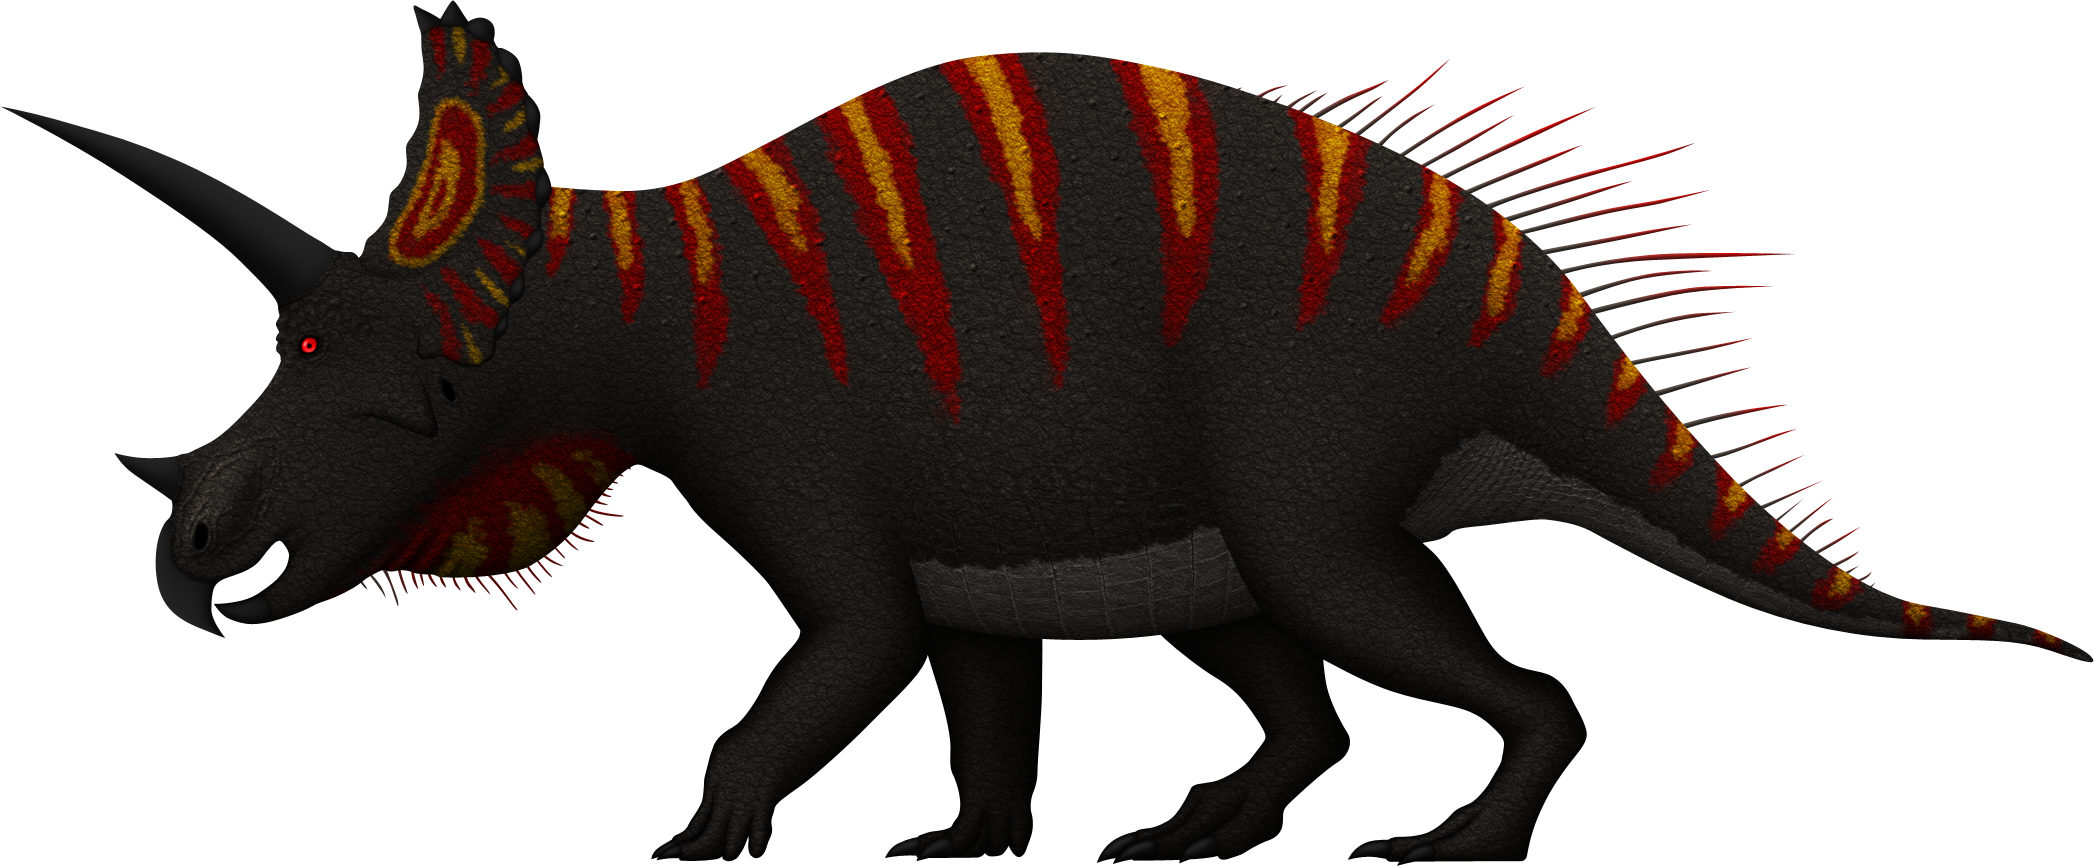 Previous Version - Triceratops (2094x866)